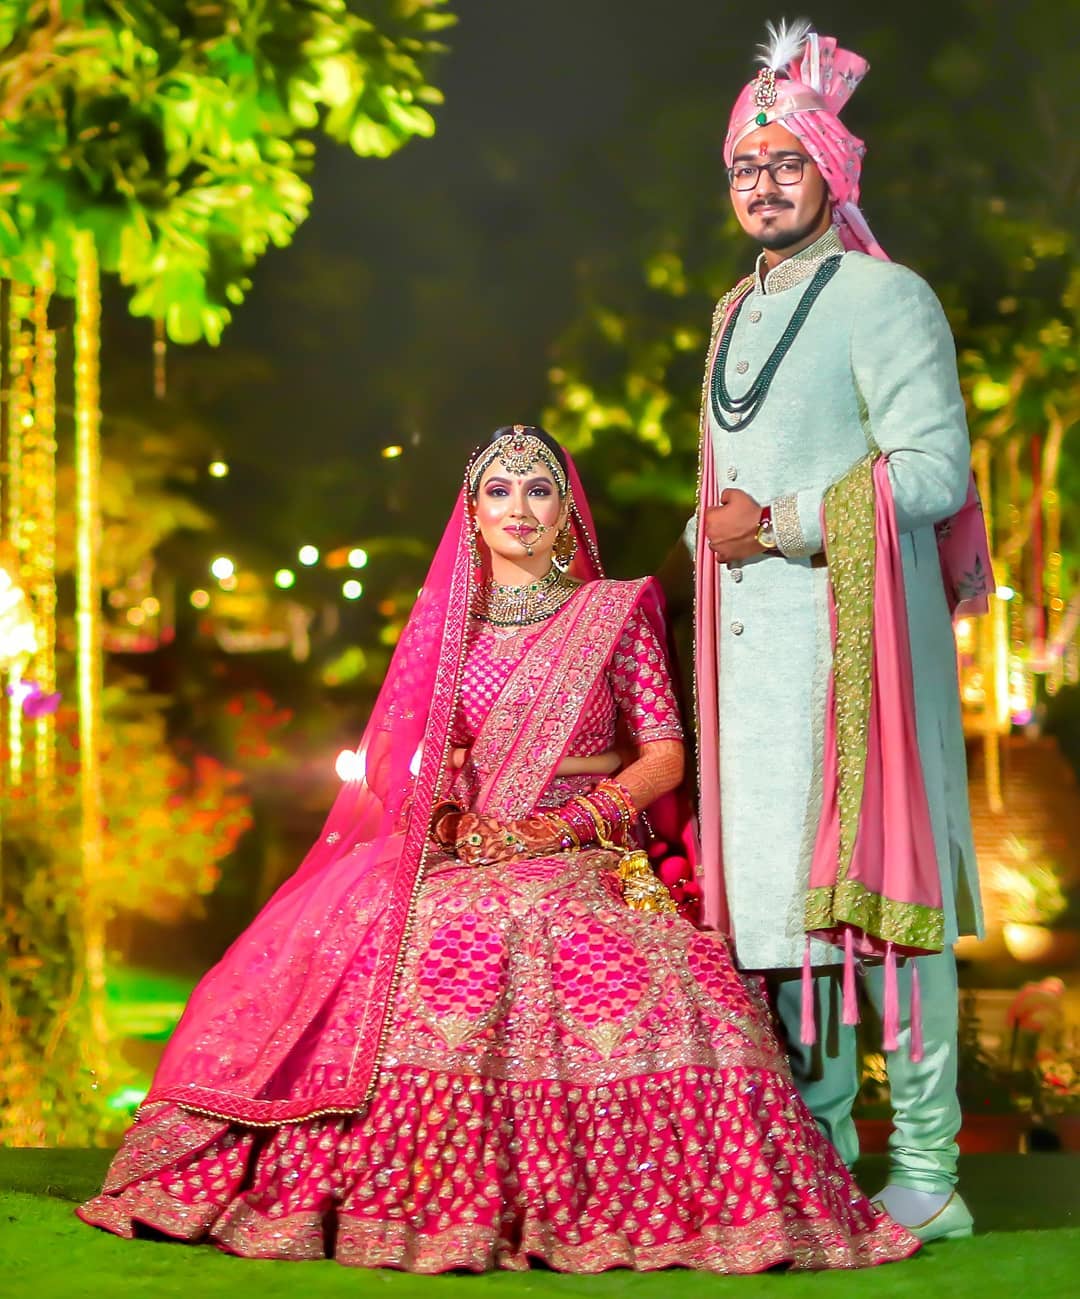 Which color suit for a groom will match a pink-orange lehenga with golden  embellishments? - Quora